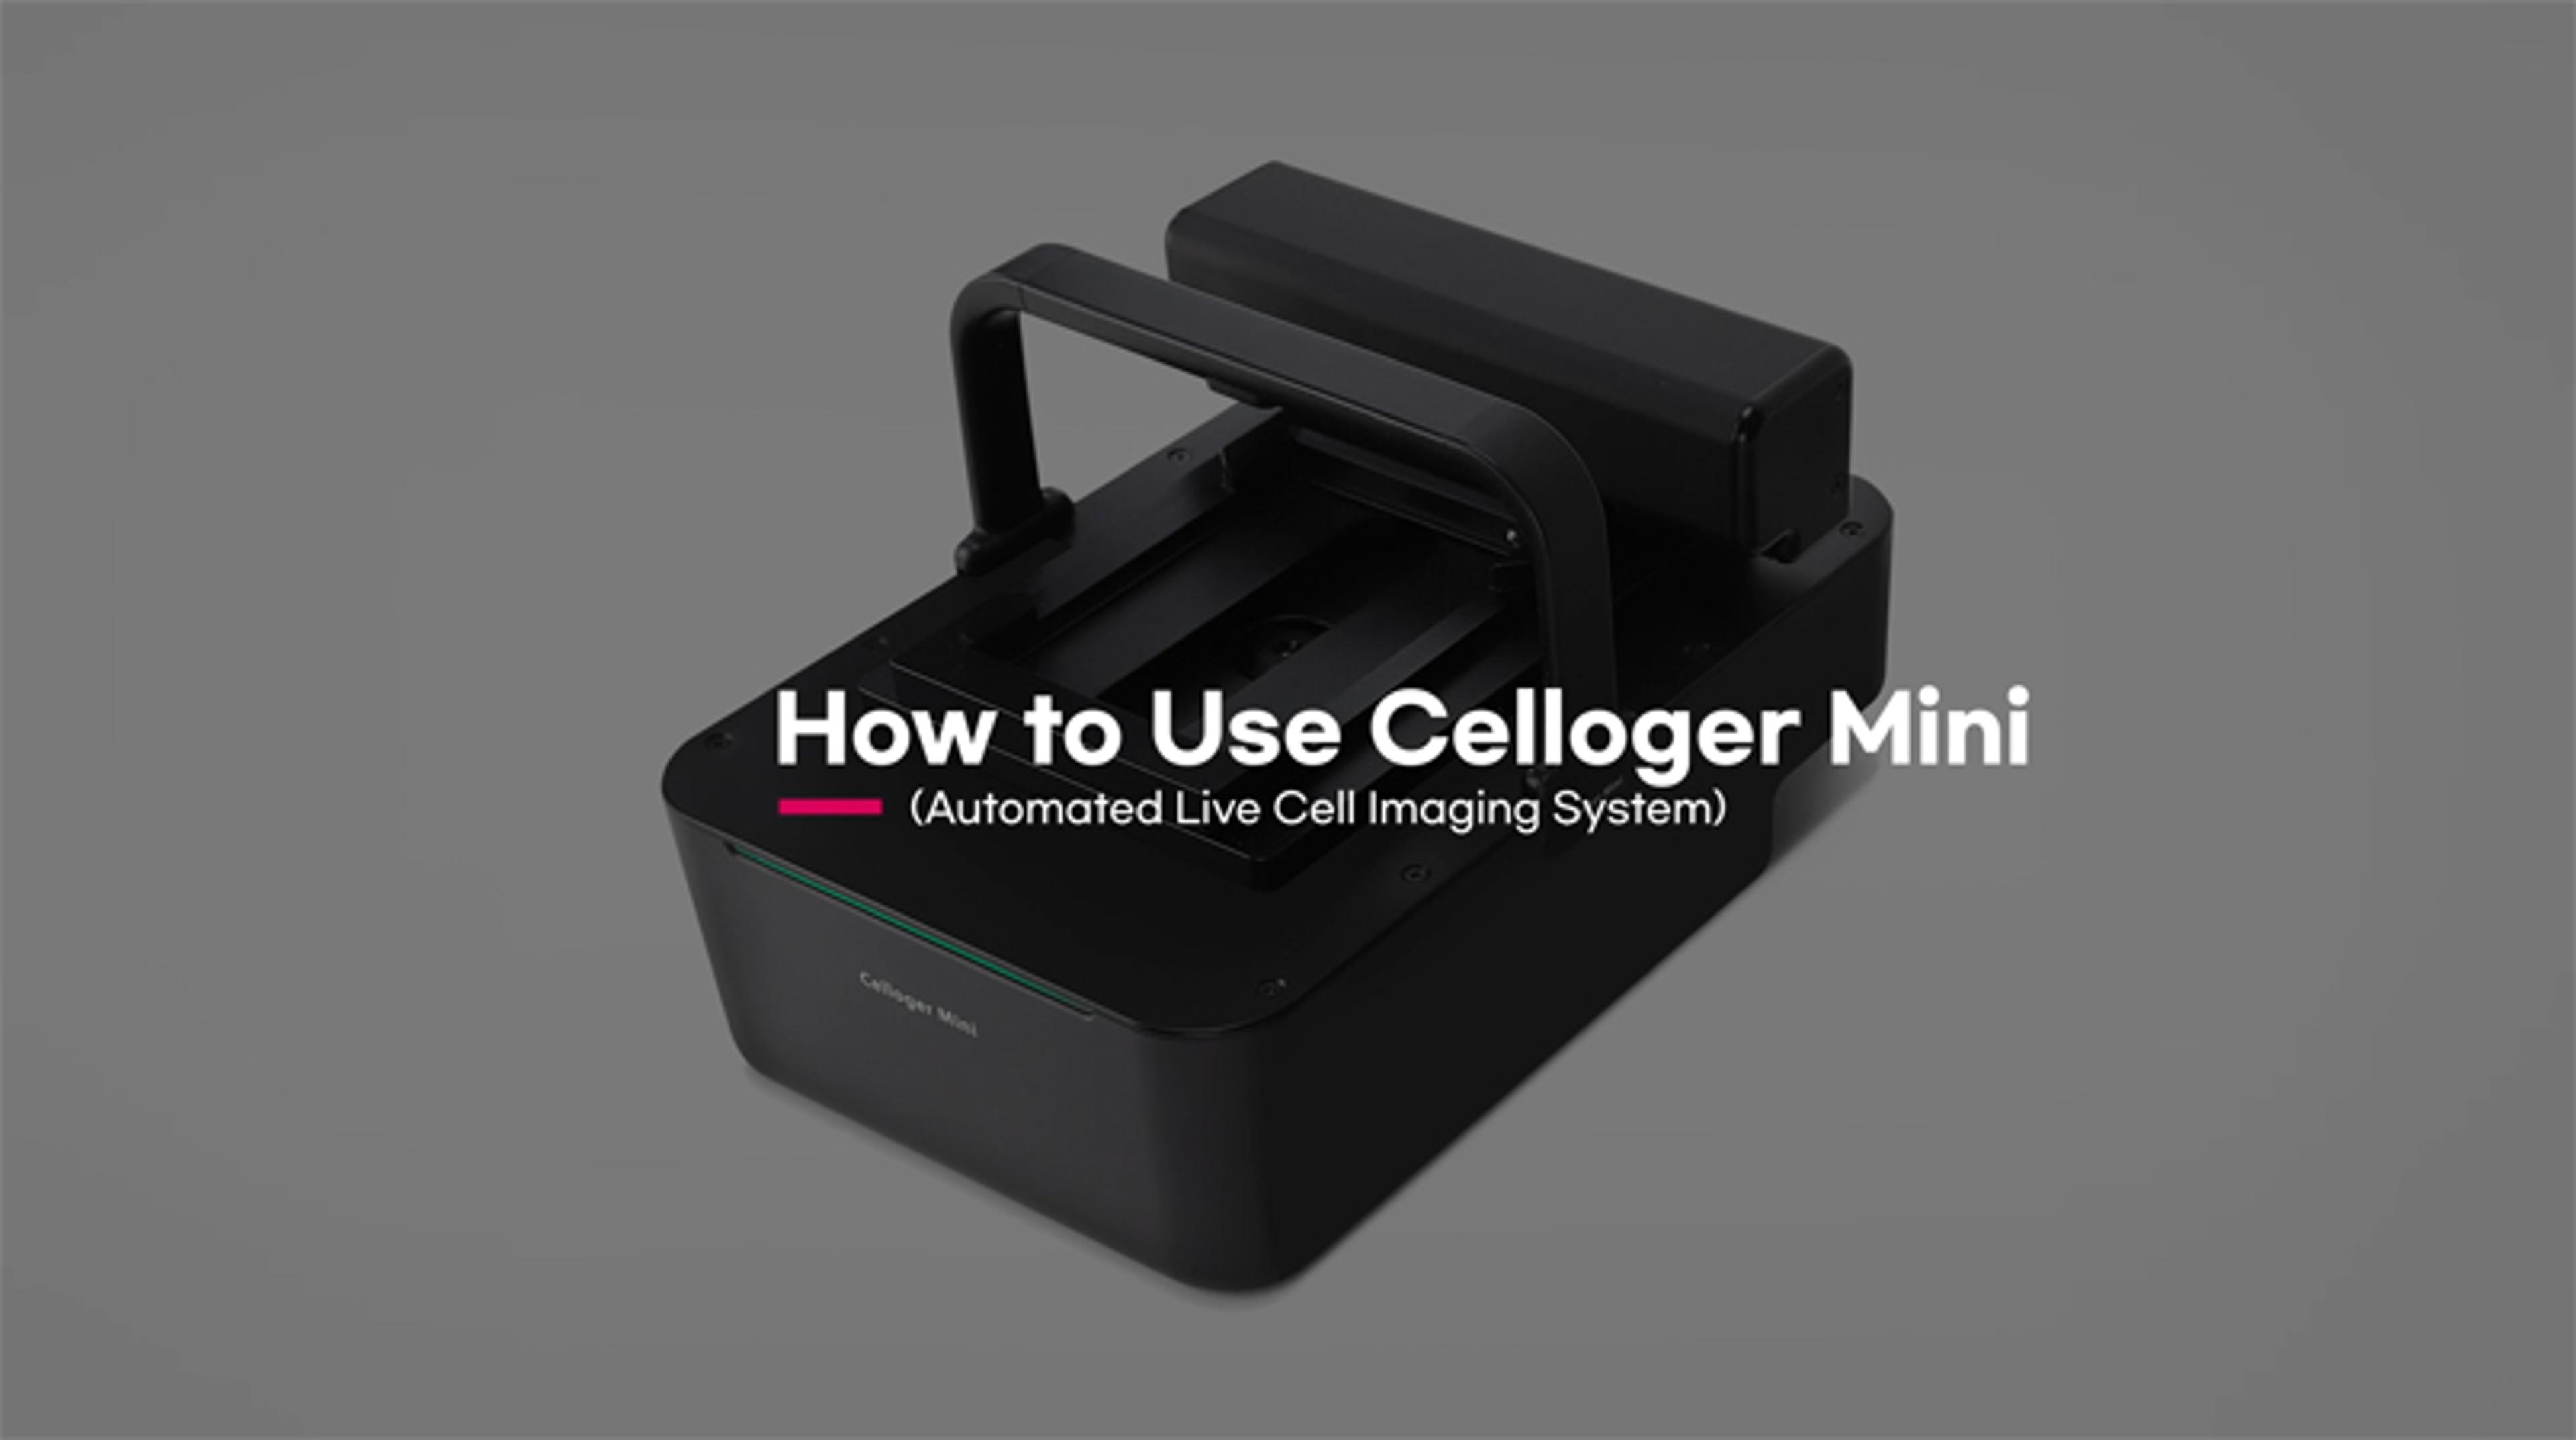 How to set up and use the CELLOGER MINI